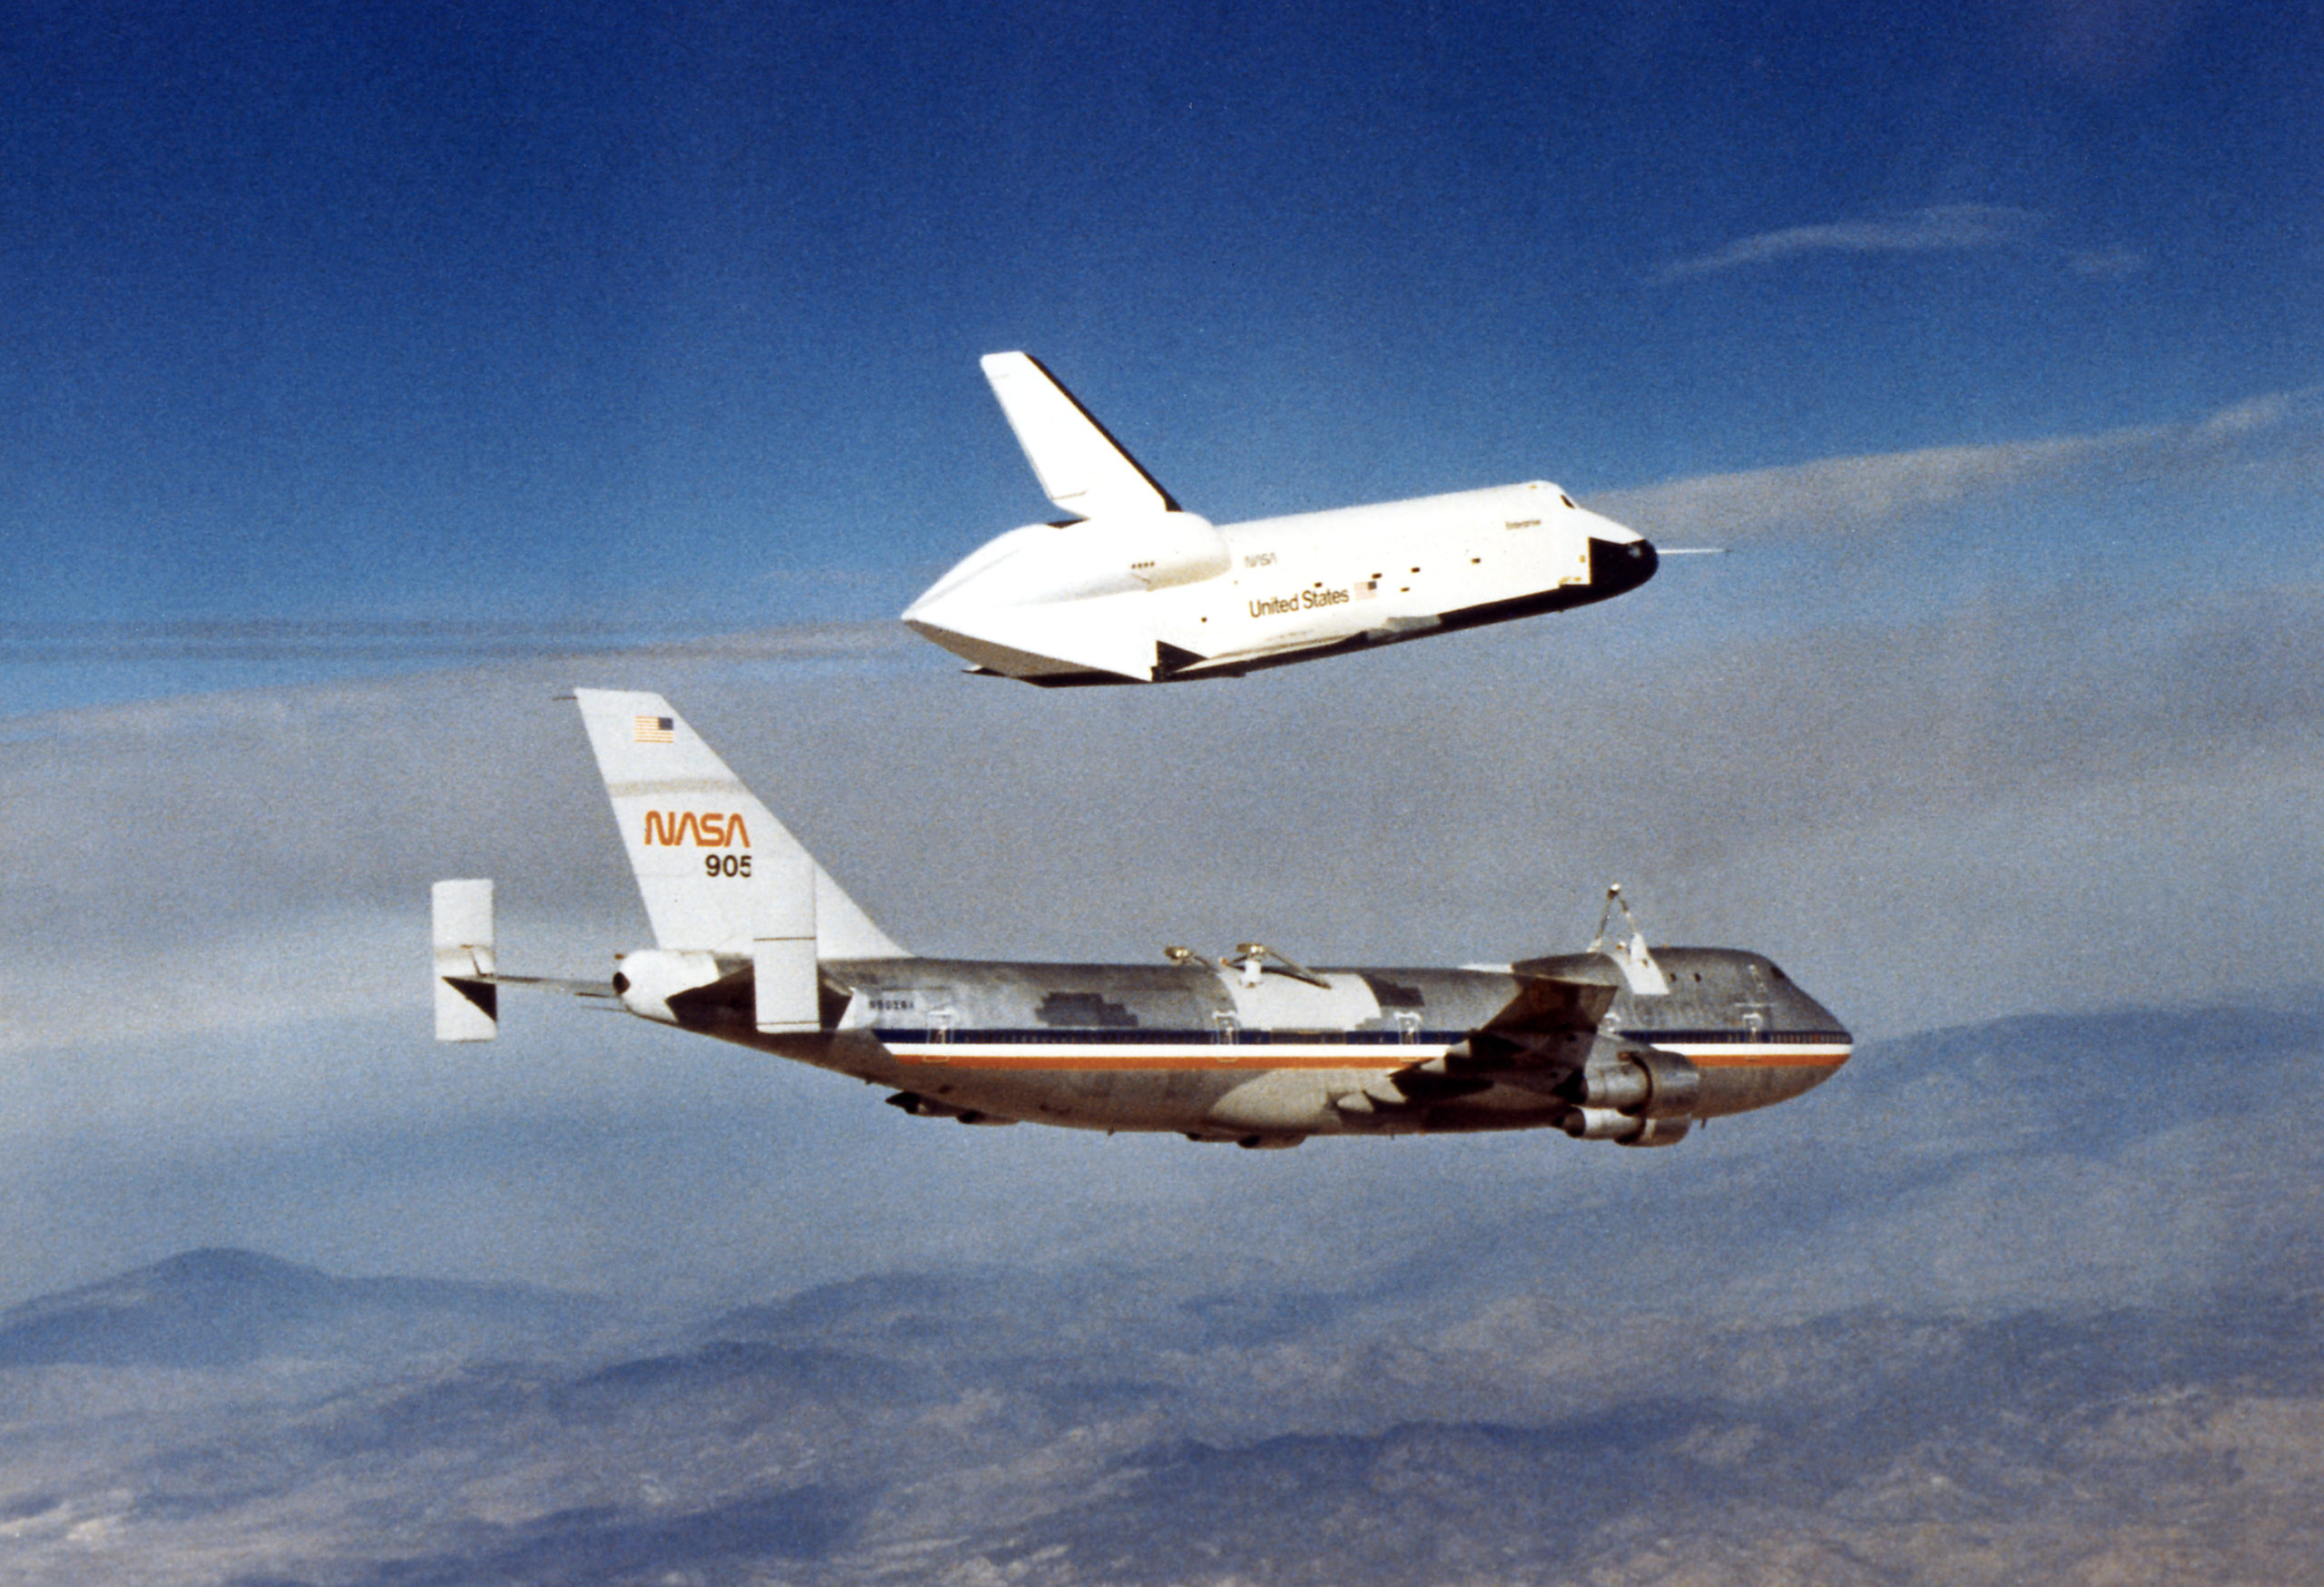 Goodbye, Space Shuttle Carrier, And Thank You For Being Awesome